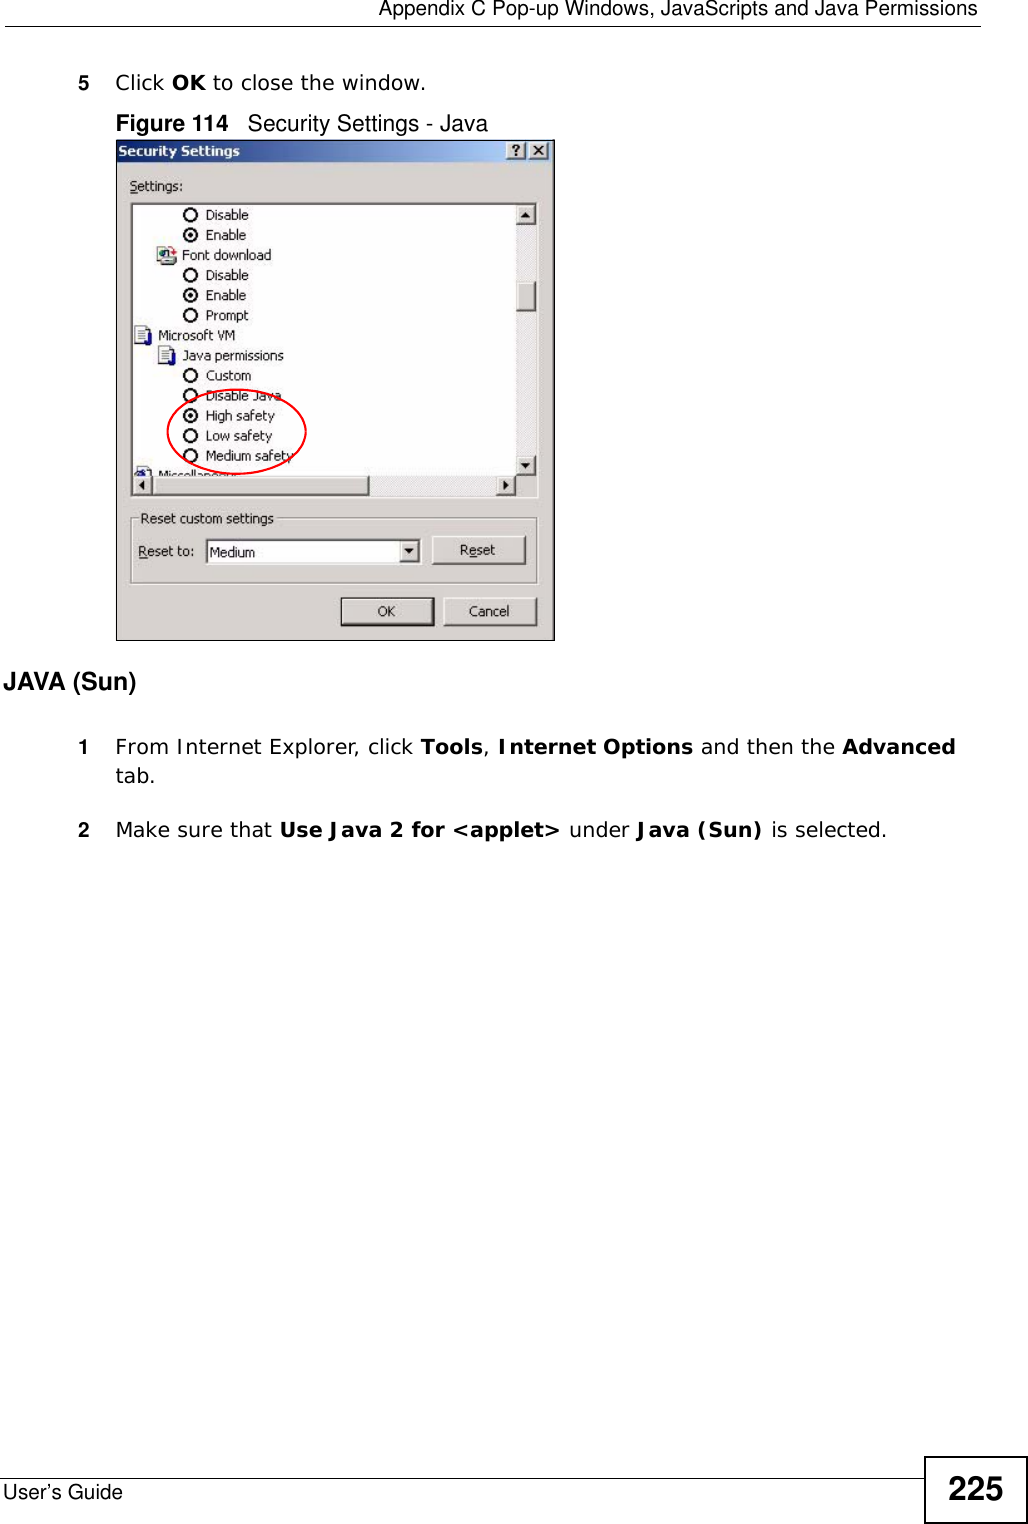  Appendix C Pop-up Windows, JavaScripts and Java PermissionsUser’s Guide 2255Click OK to close the window.Figure 114   Security Settings - Java JAVA (Sun)1From Internet Explorer, click Tools, Internet Options and then the Advanced tab. 2Make sure that Use Java 2 for &lt;applet&gt; under Java (Sun) is selected.